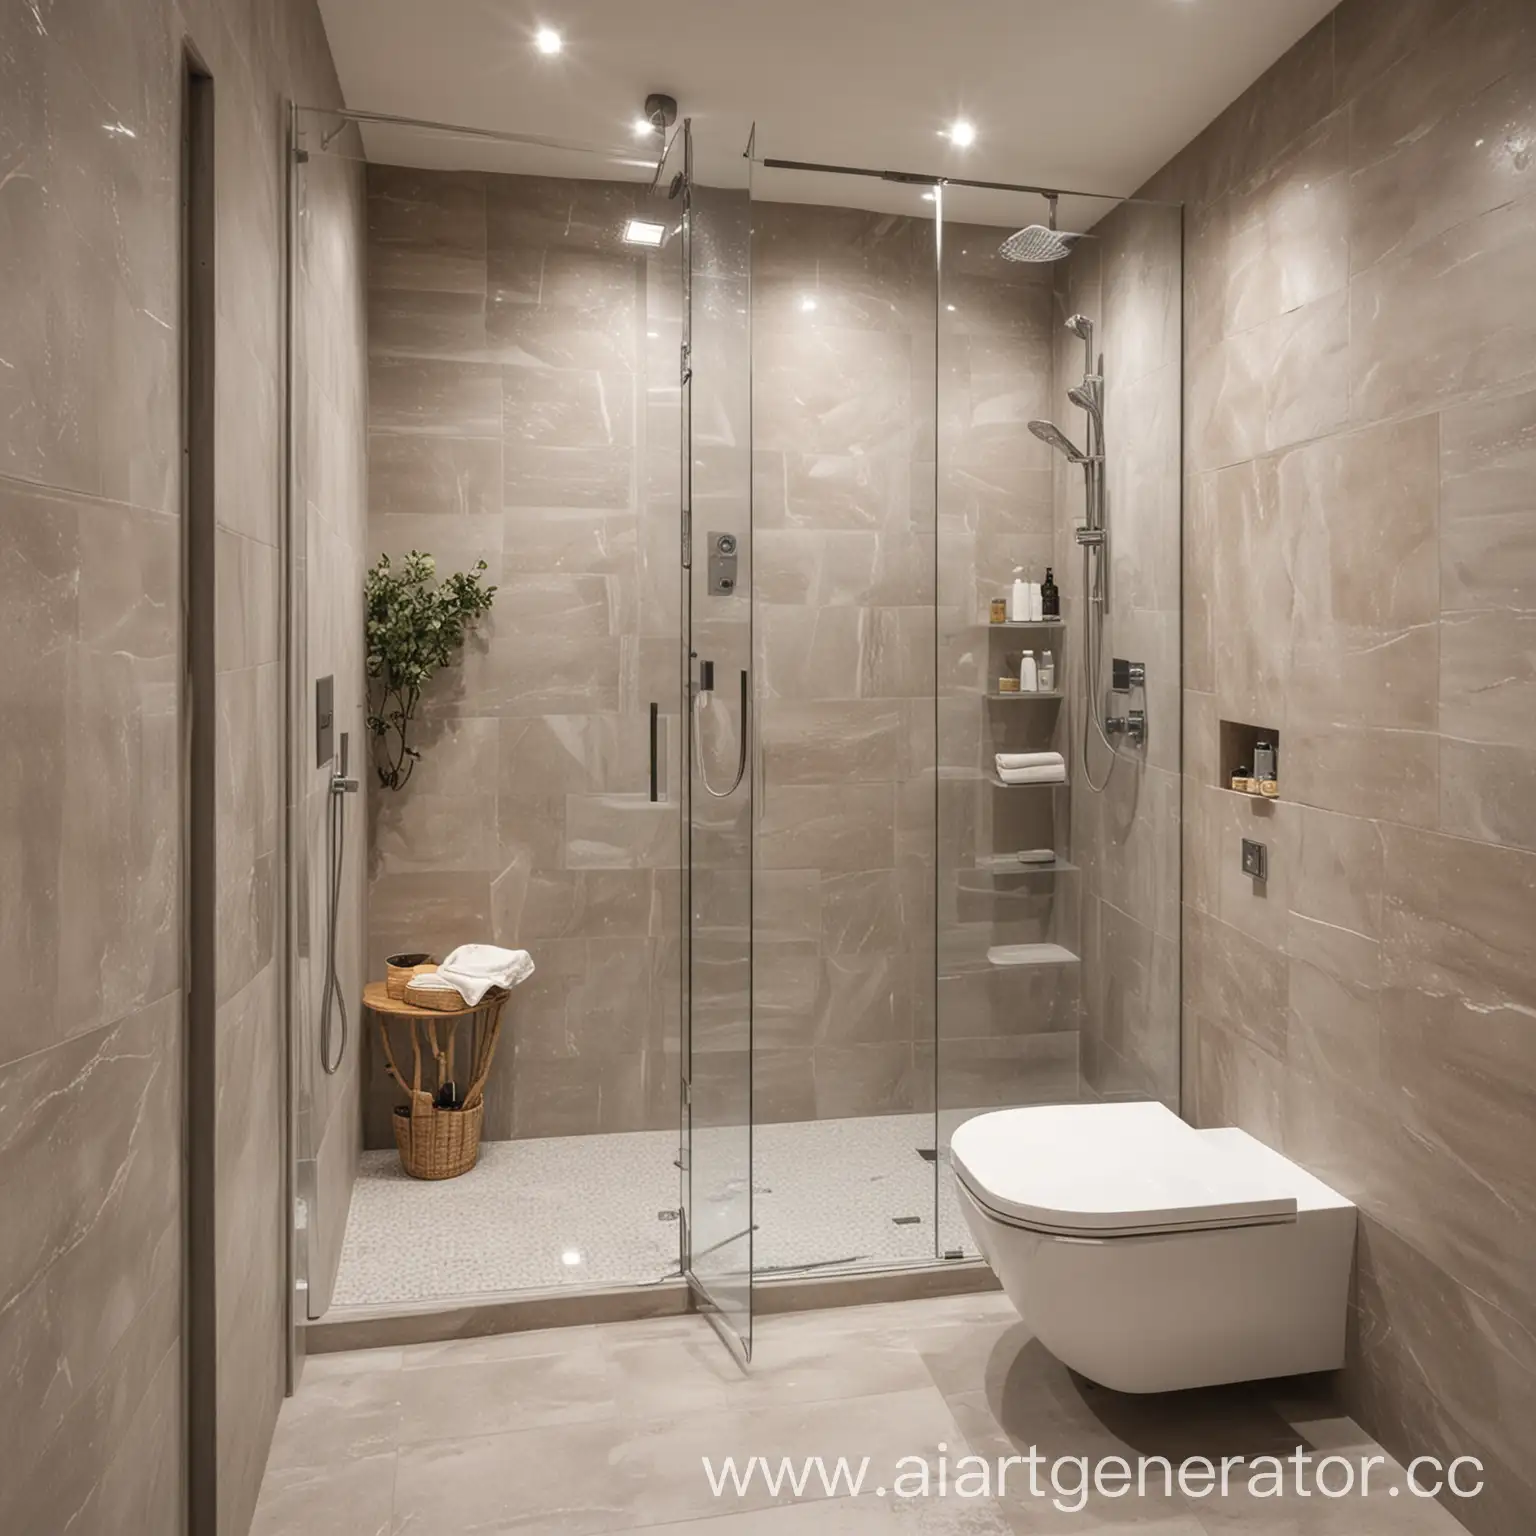 Modern-Bathroom-Interior-with-Glass-Shower-Partition-and-Neutral-Lighting